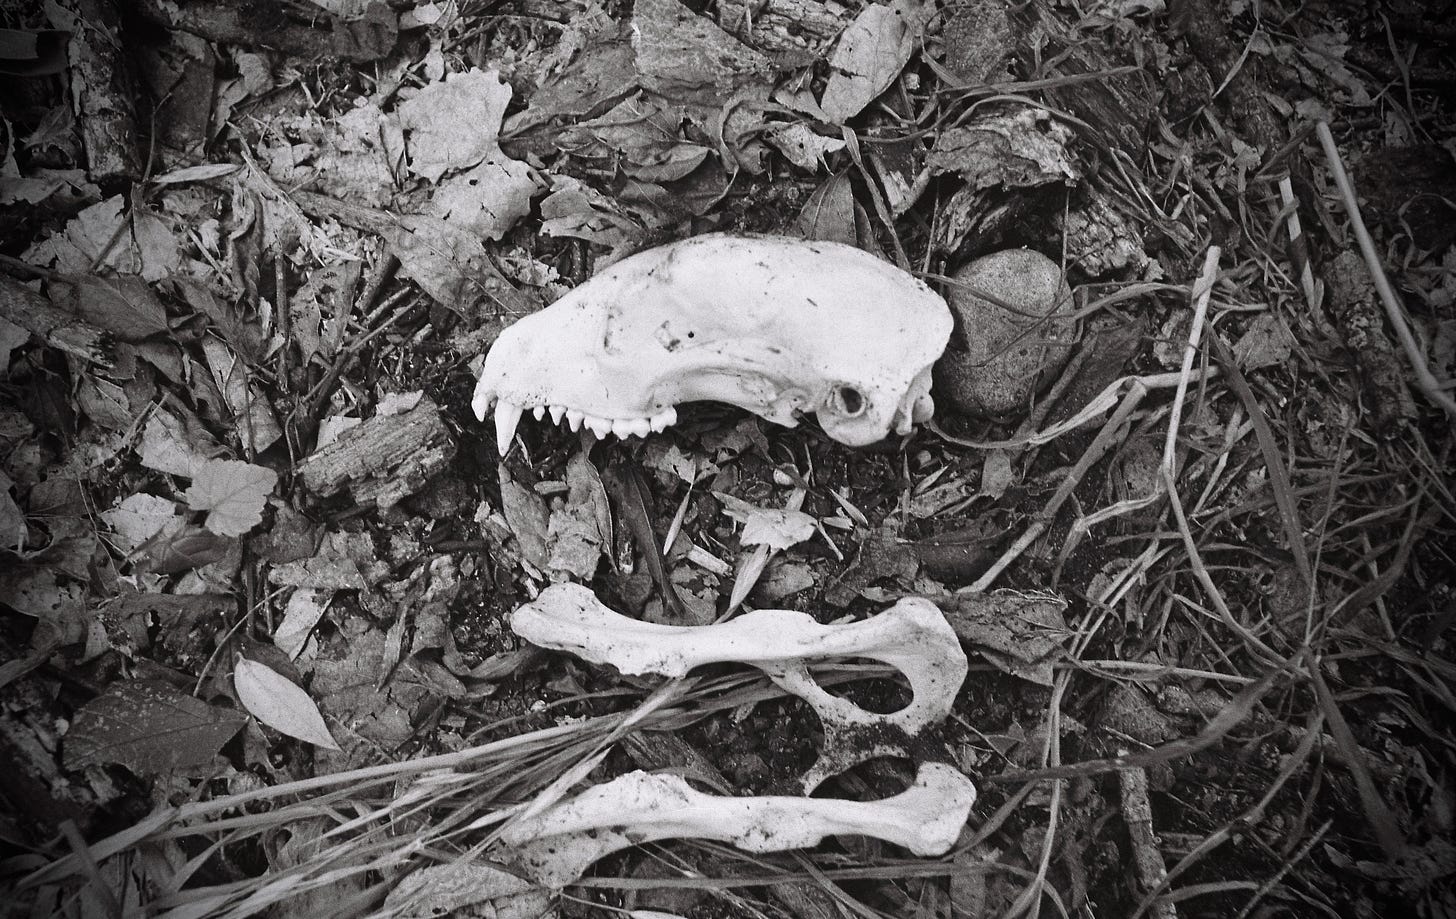 Black and white film photo of fanged skull and bones